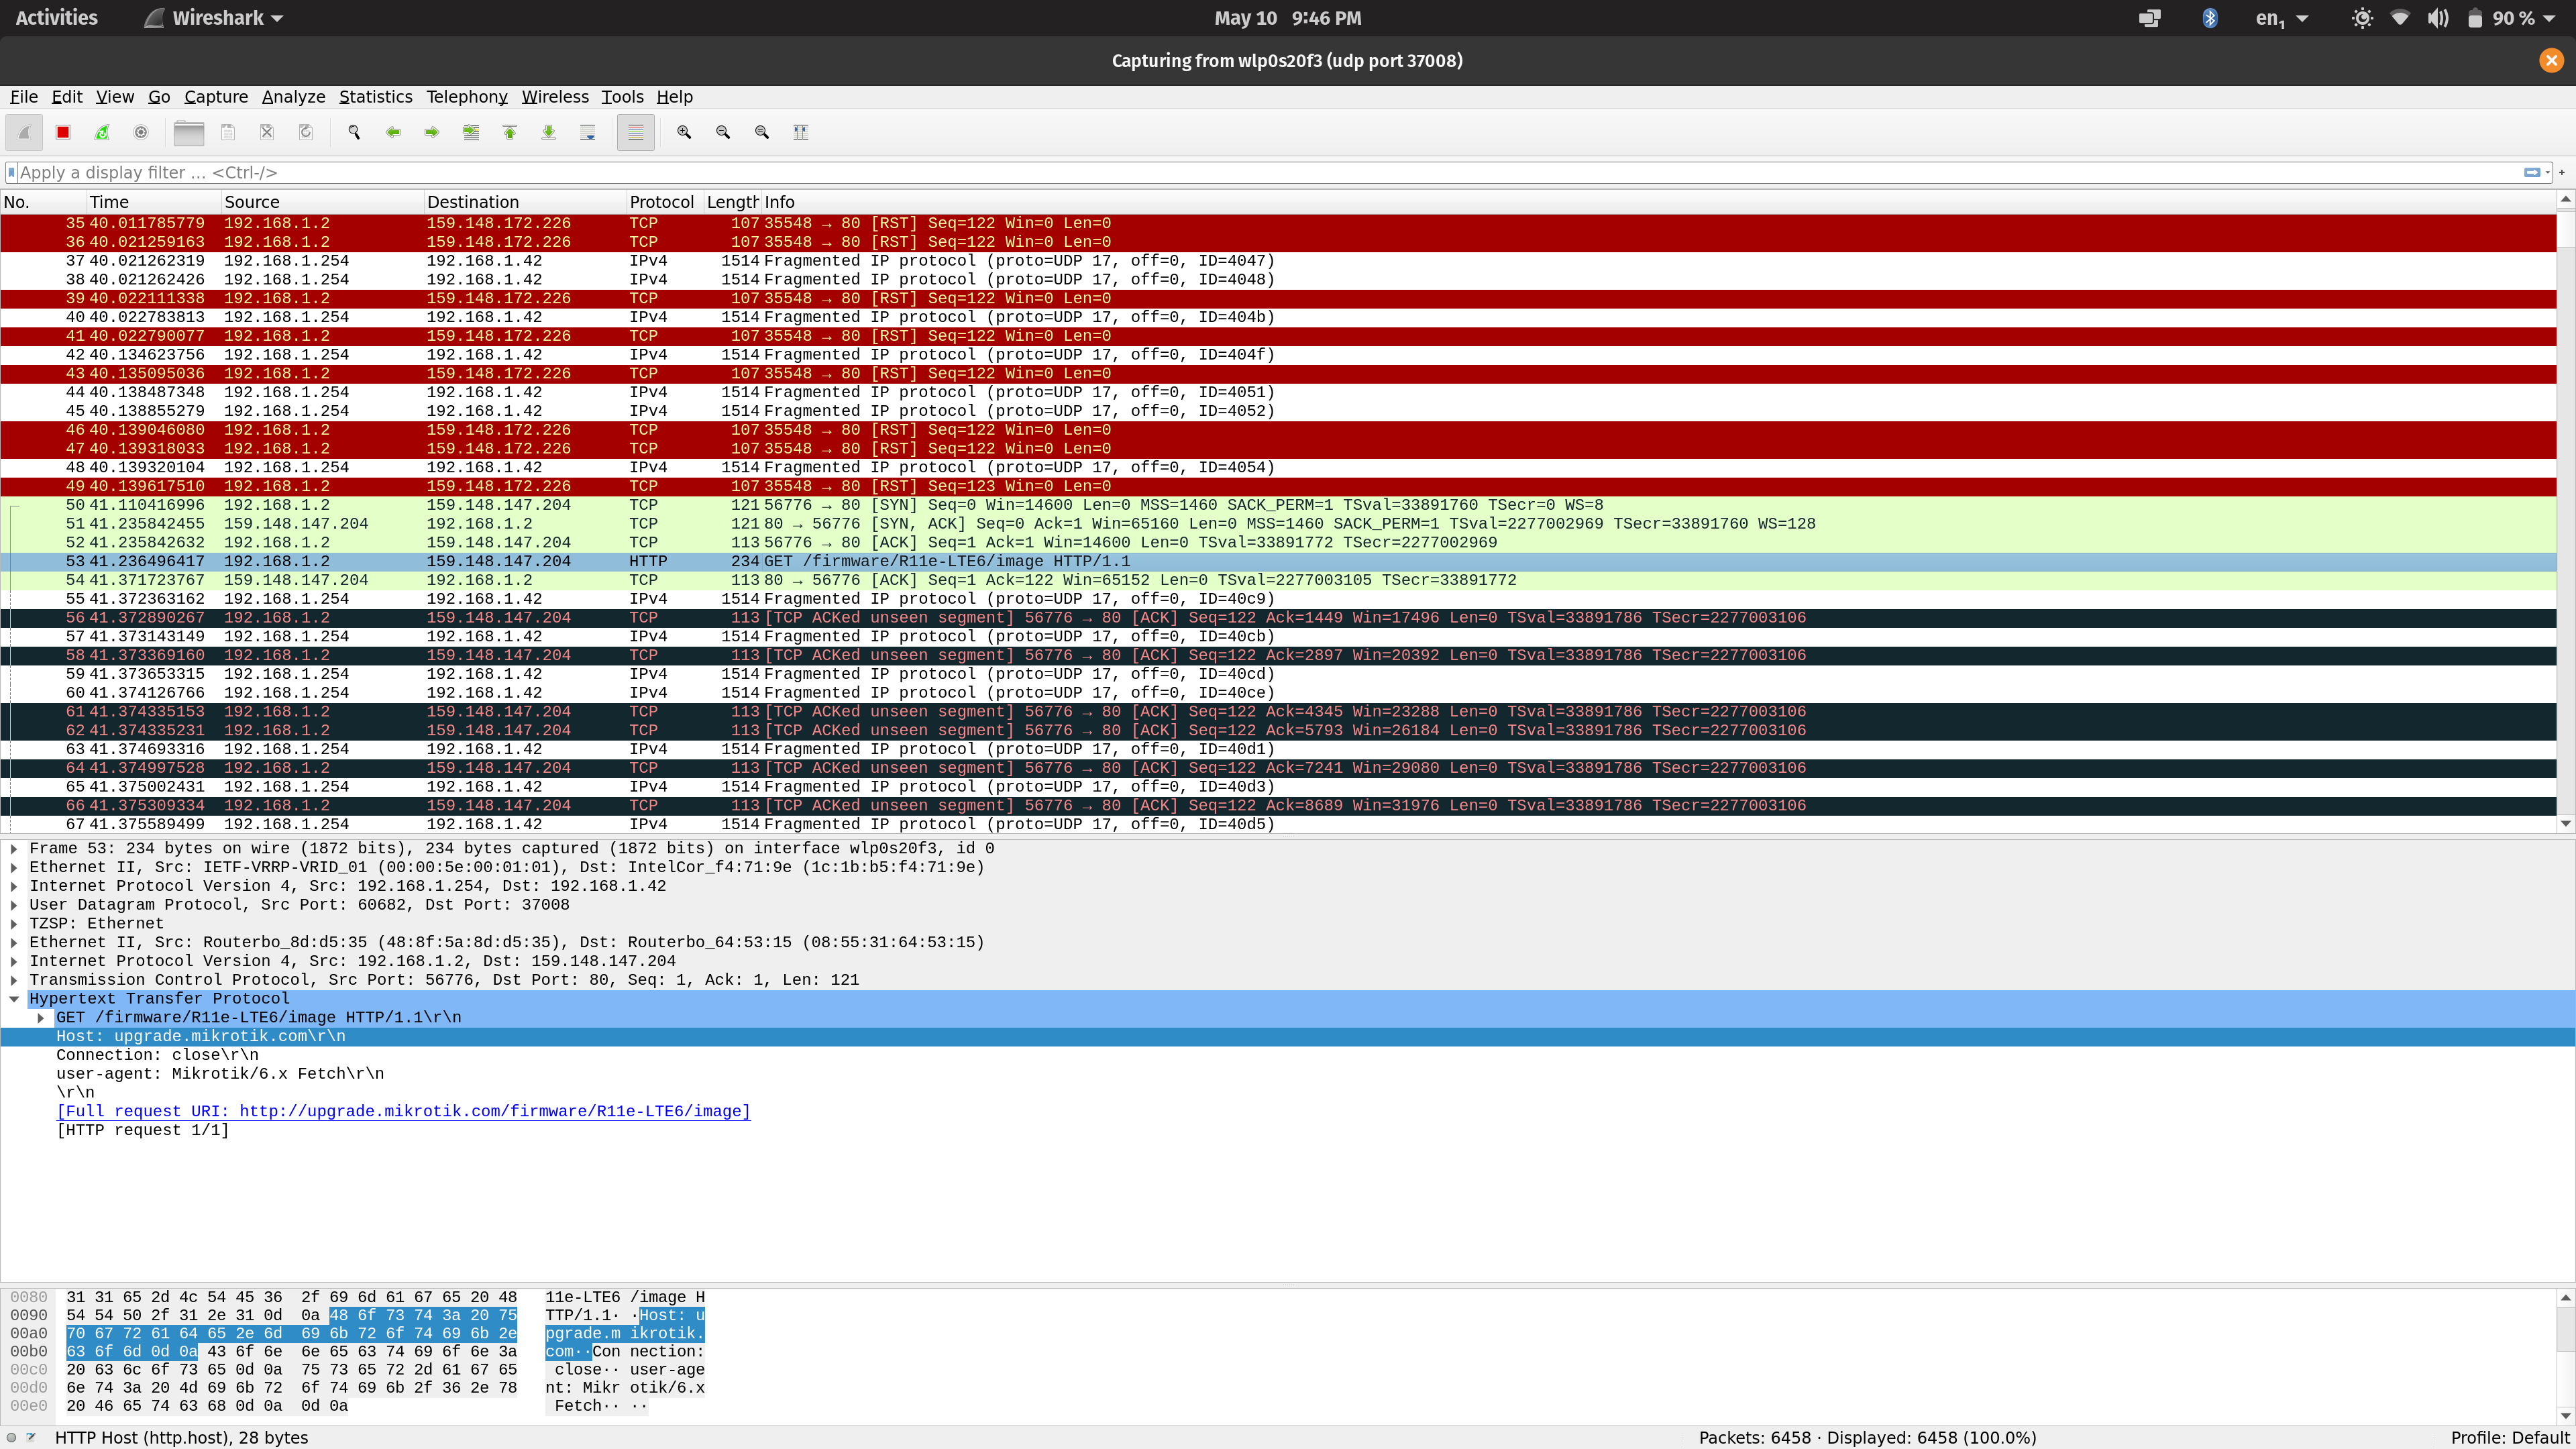 Screenshot of Wireshark sniffing packets with more meaning